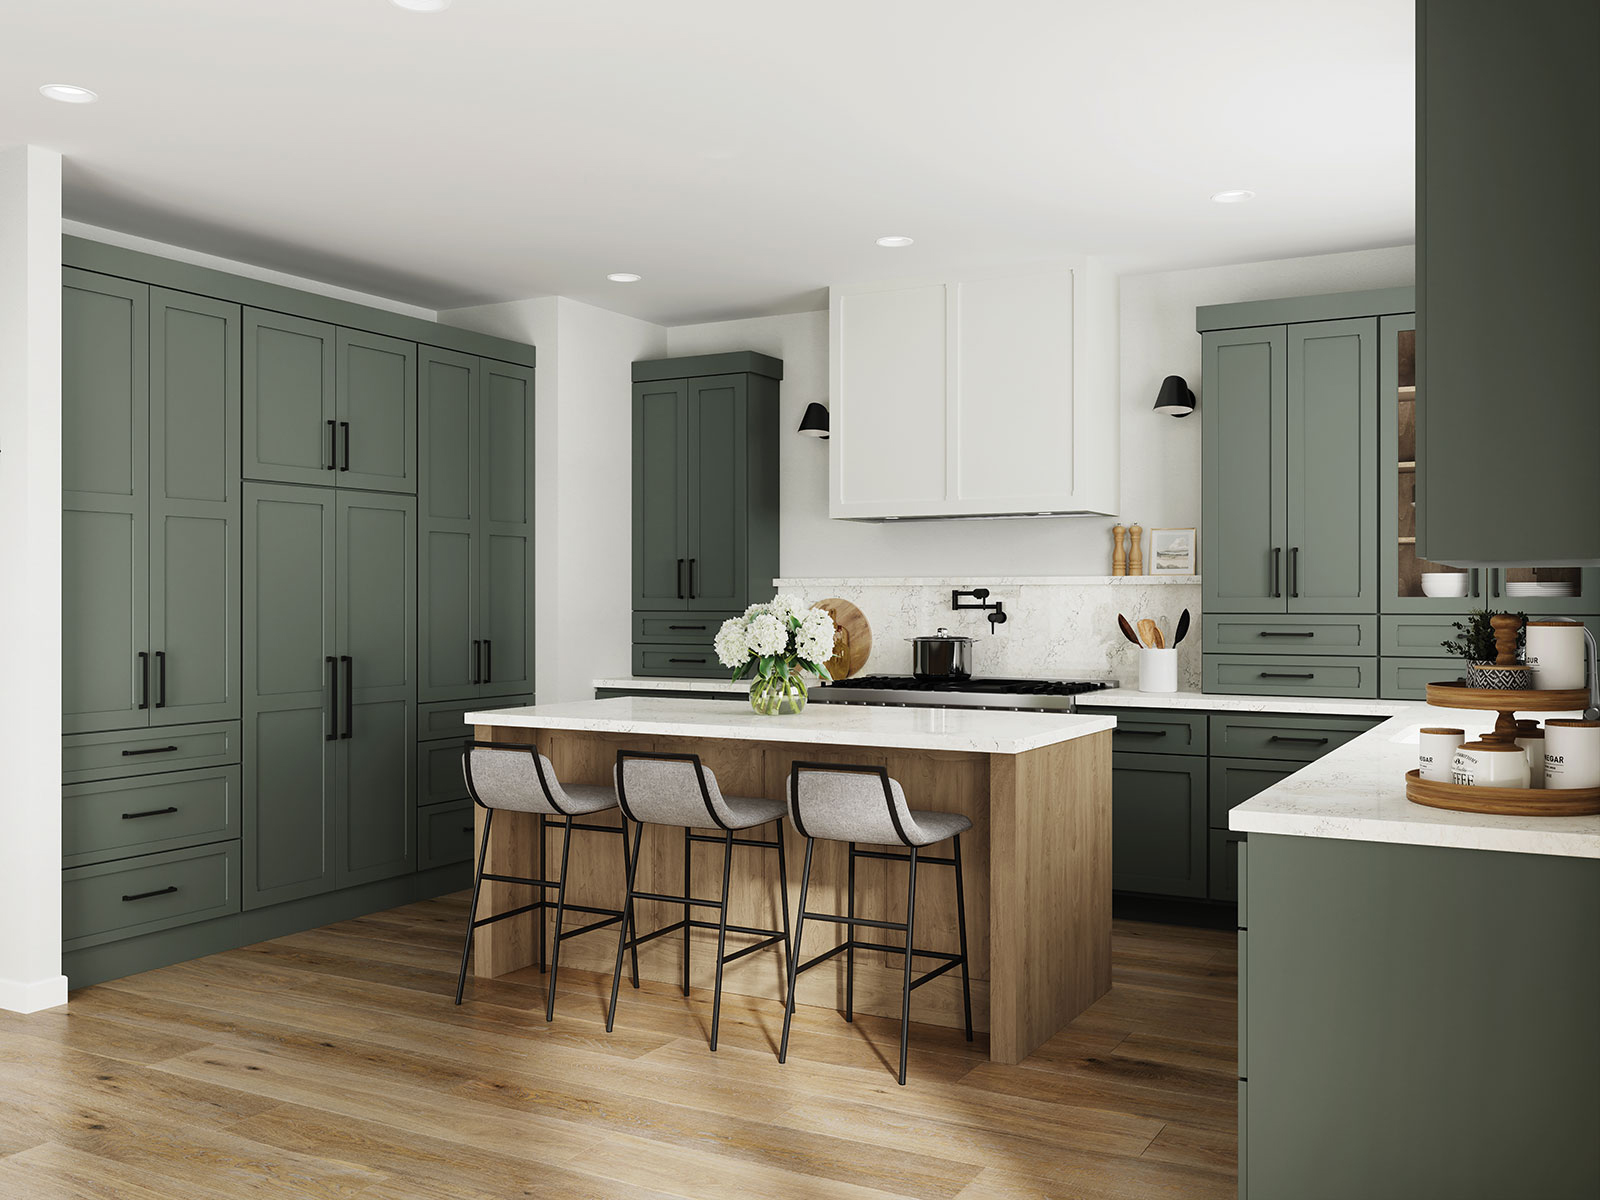 Olive green painted kitchen cabinets with white painted accents and a wood kitchen island.